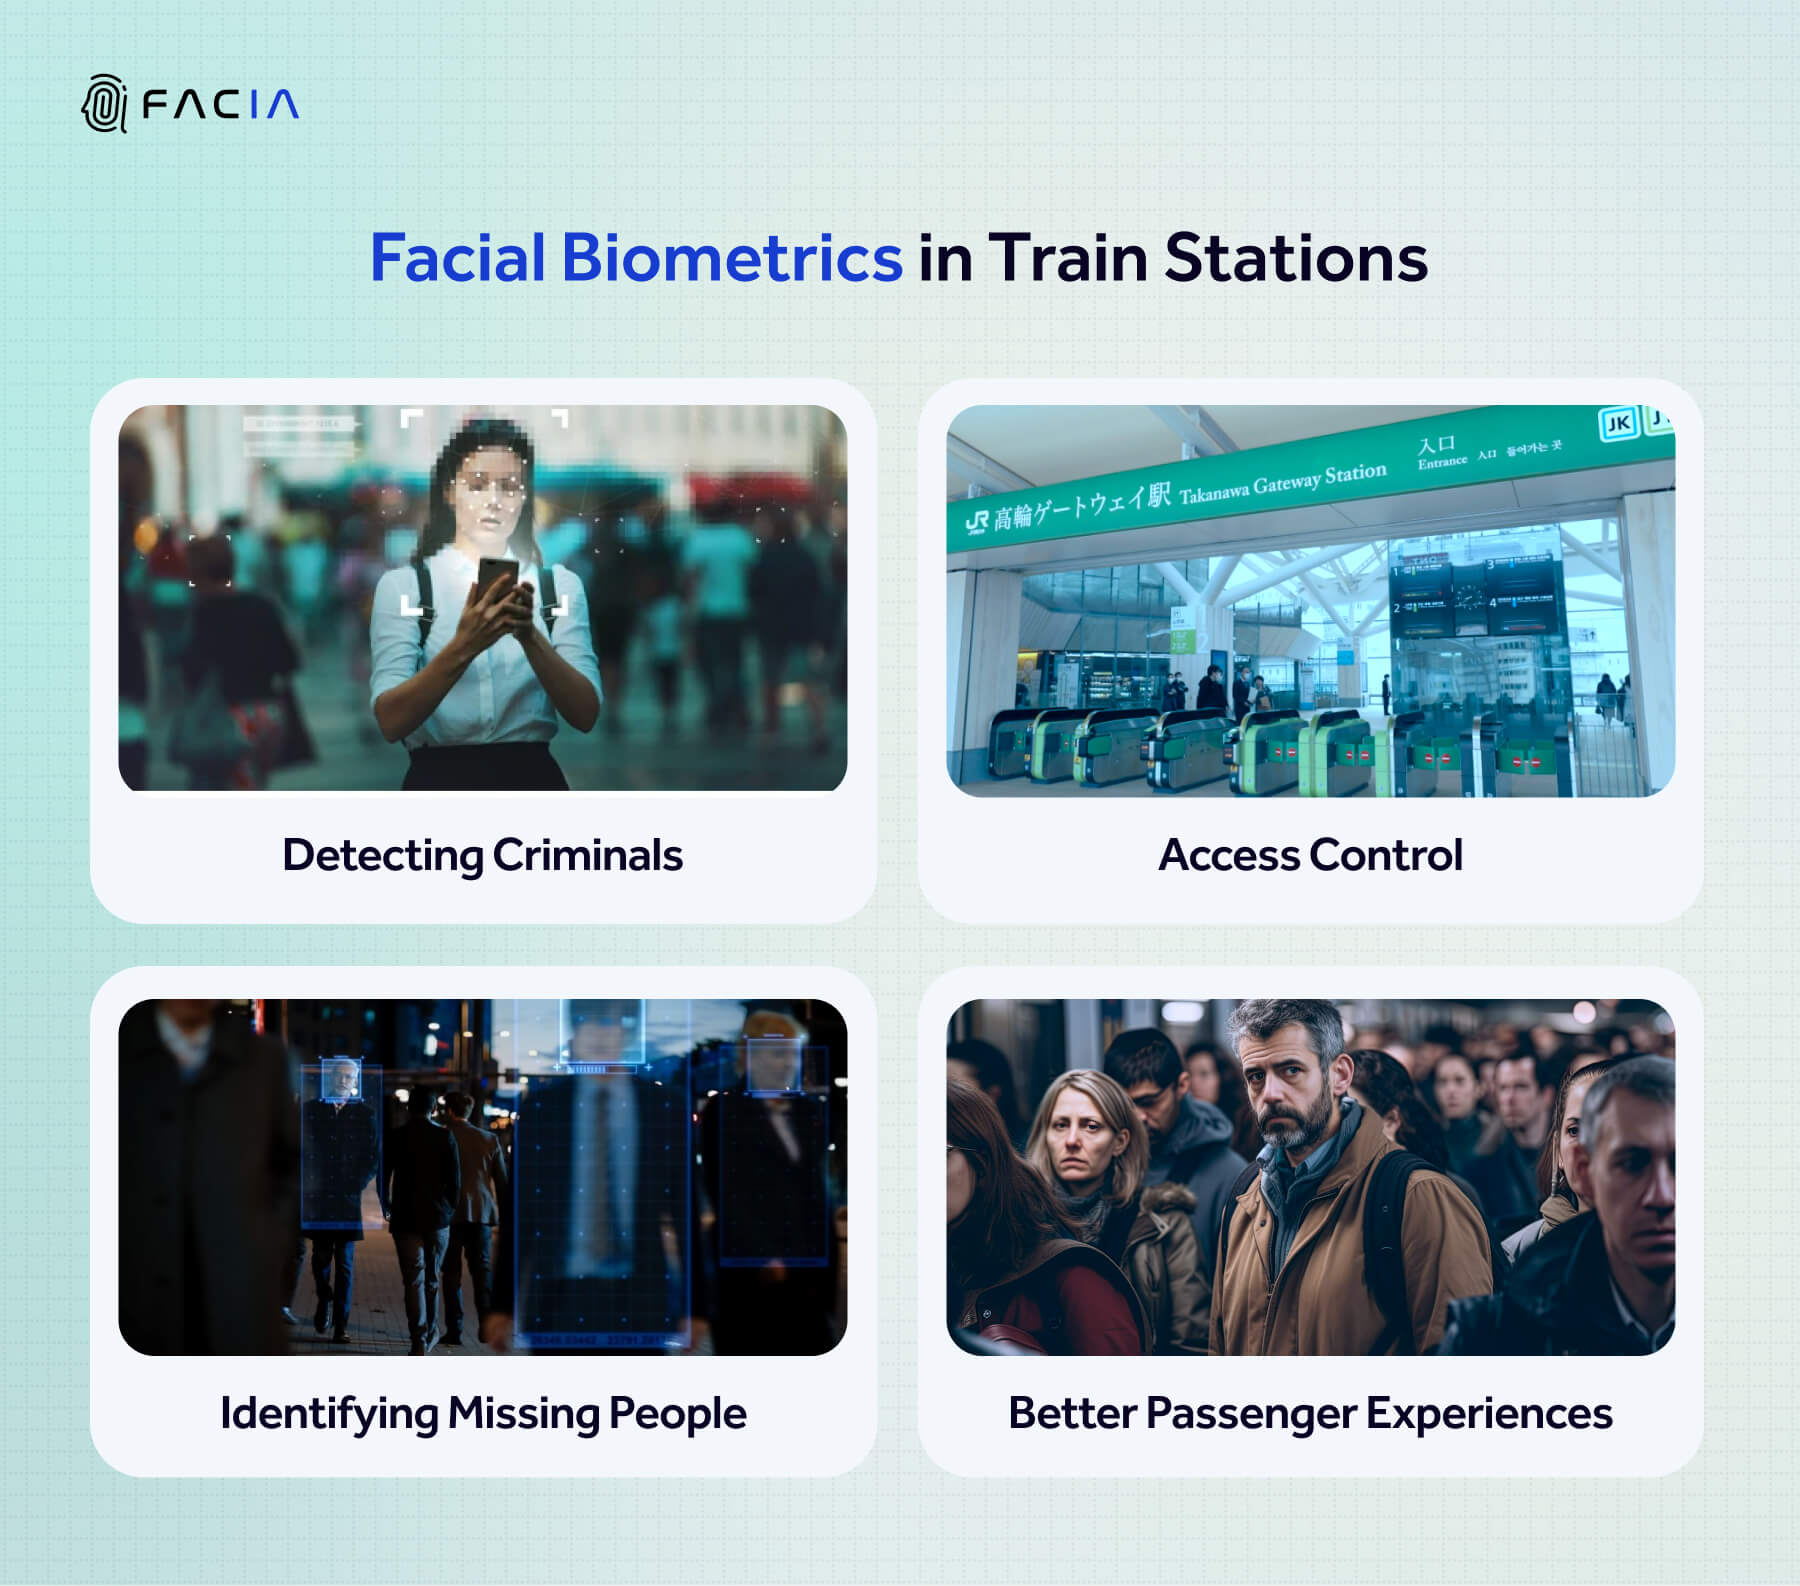 Facial biometrics can be implemented at railway stations for the purposes of detecting criminals, access control, identifying missing people and creating better passenger experiences.